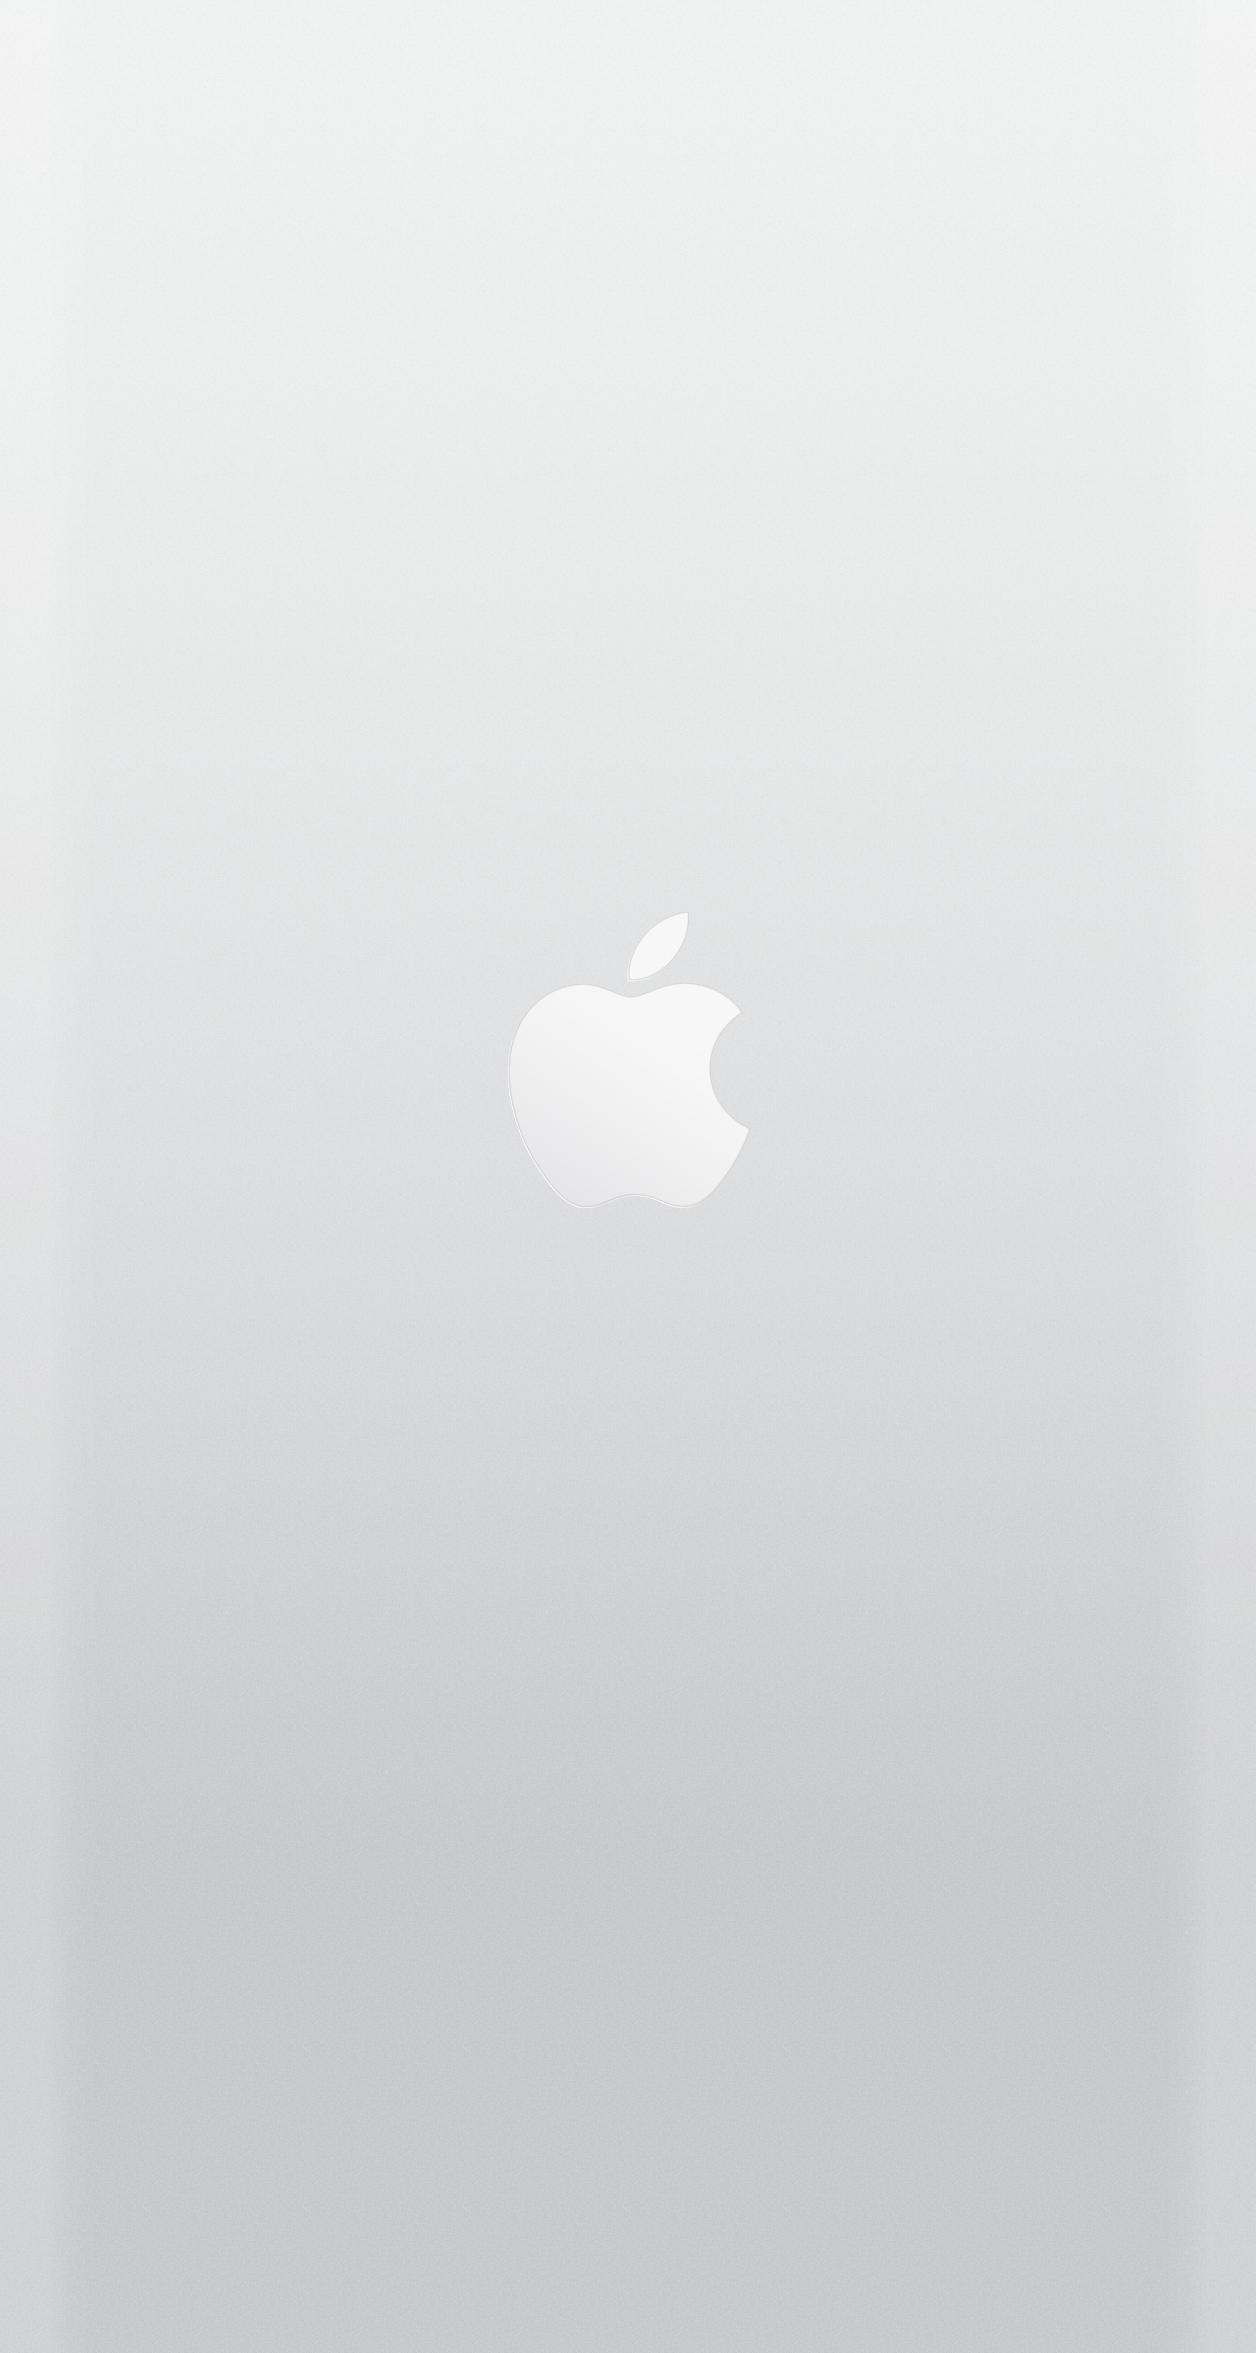 Apple Logo Wallpaper For iPhone And Plus